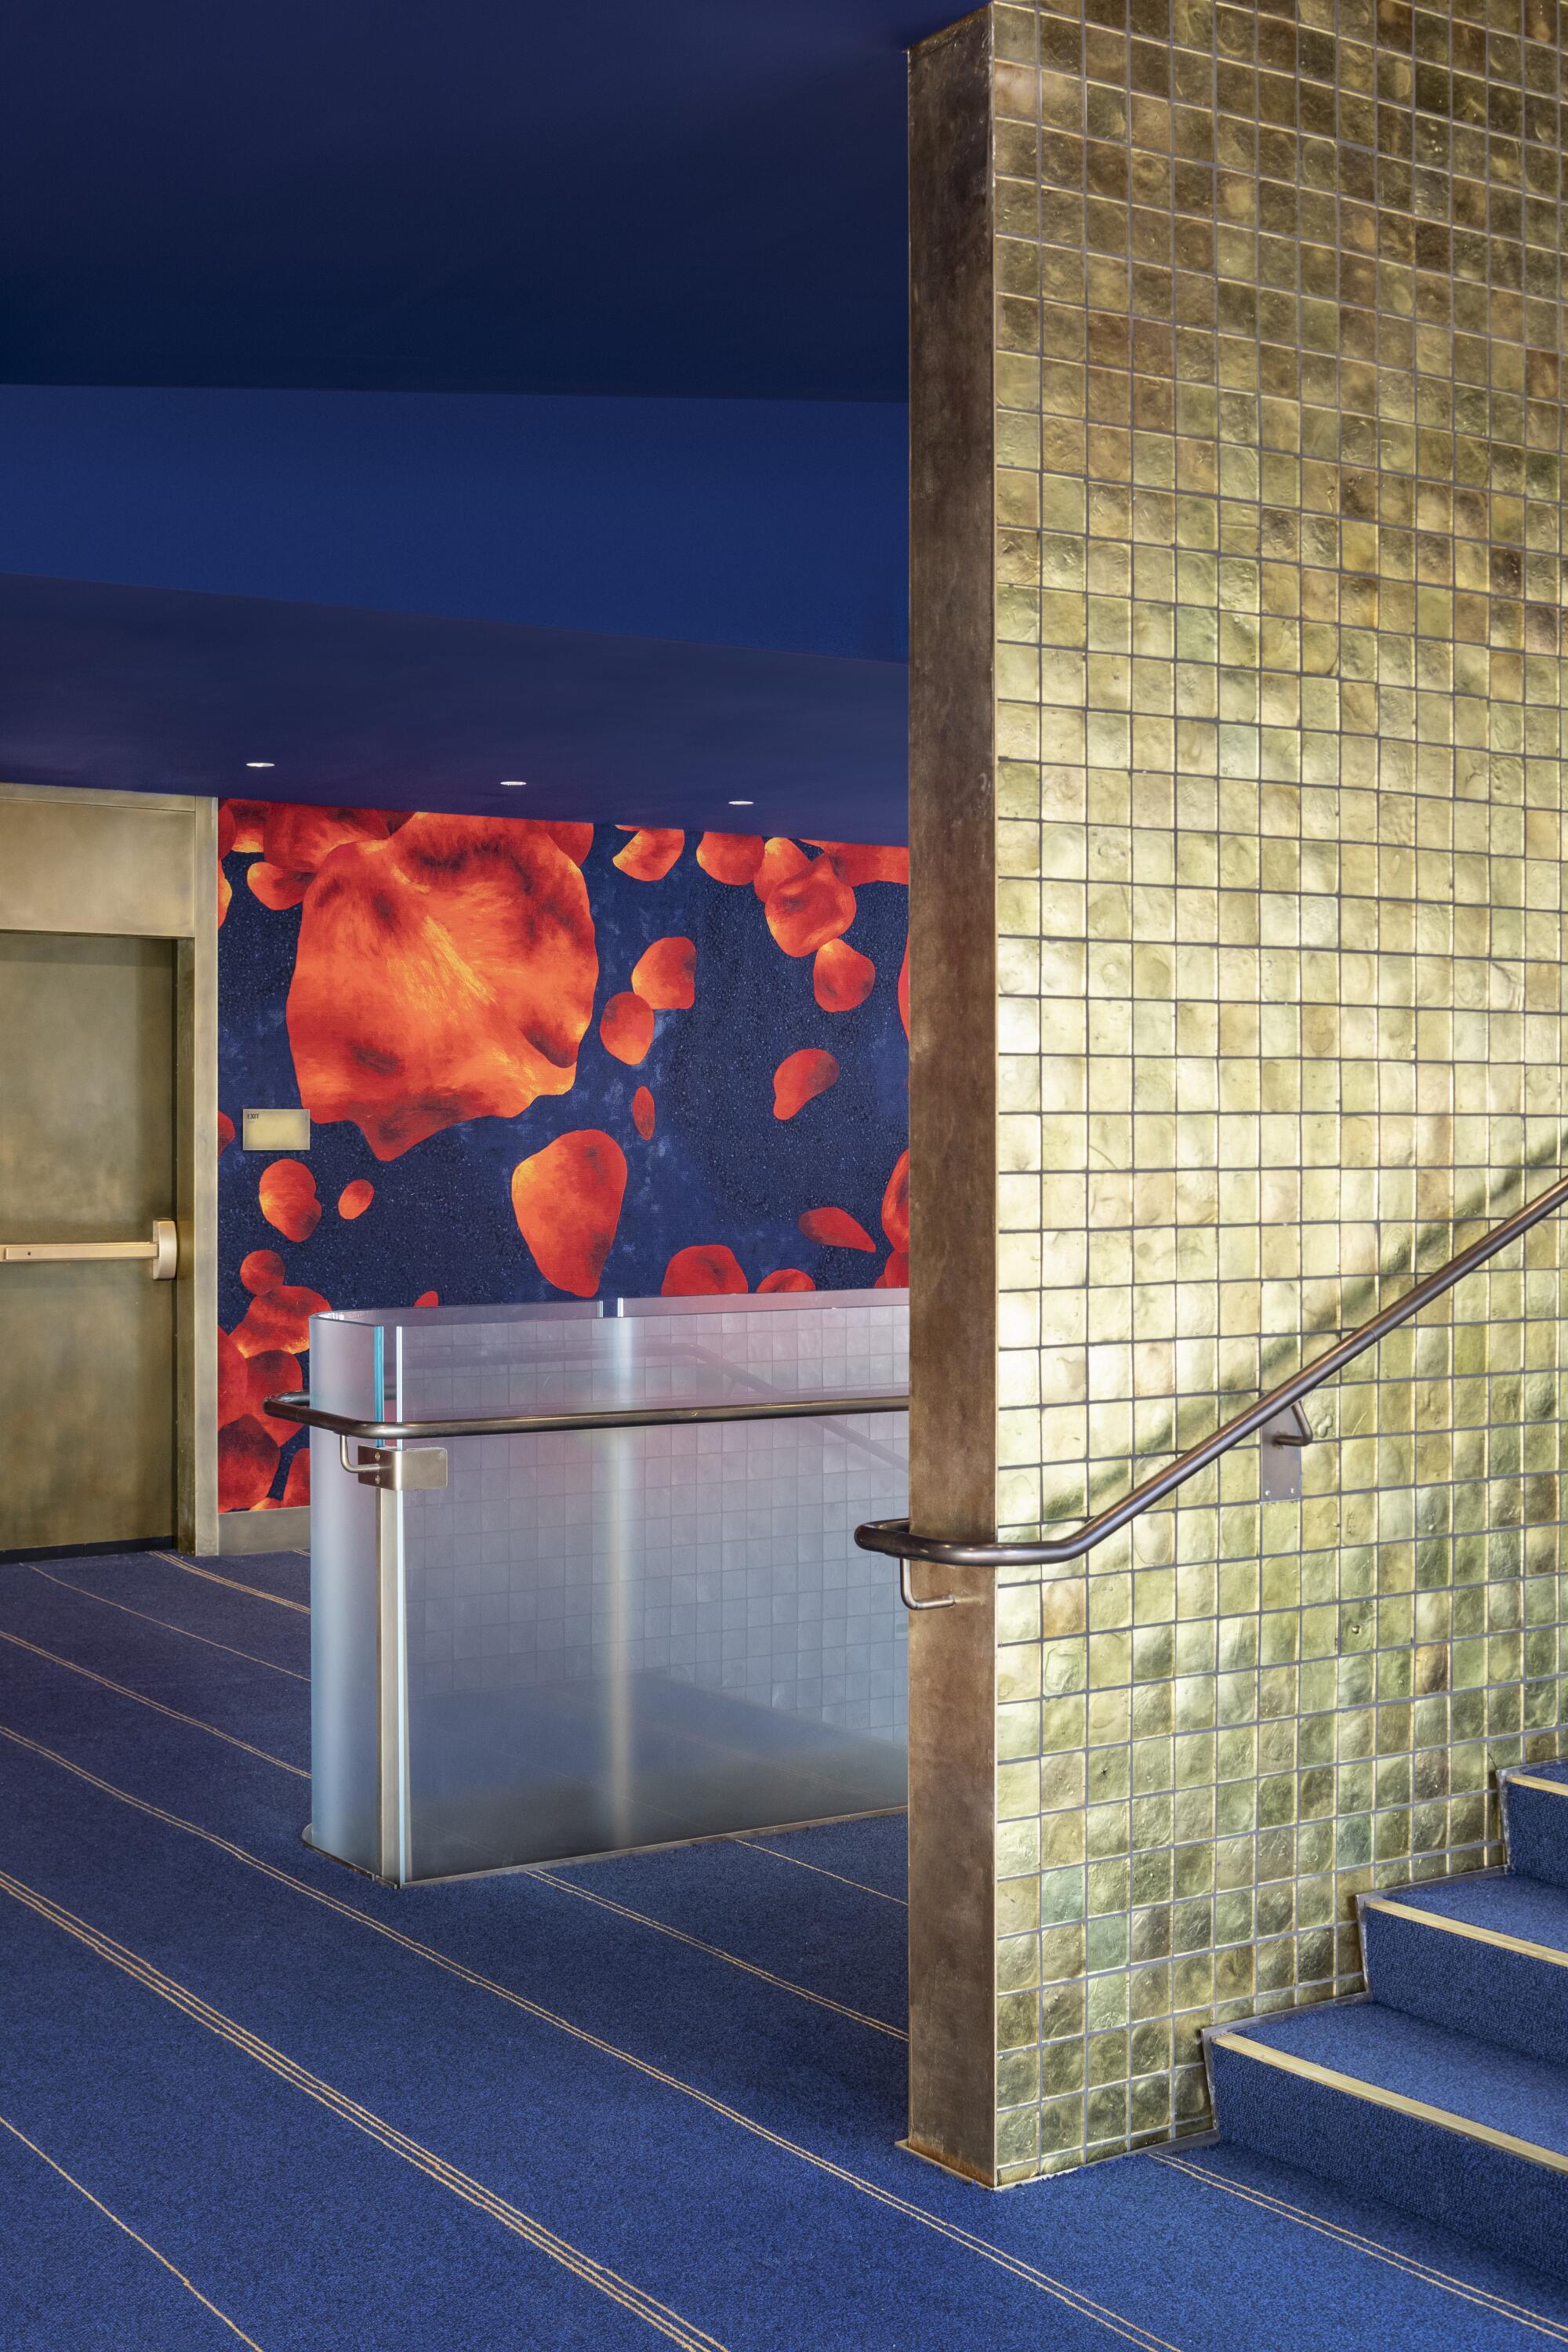 A stair descends along a wall clad in shimmering, gold tile. At rear, a wall features a pattern of falling rose petals.